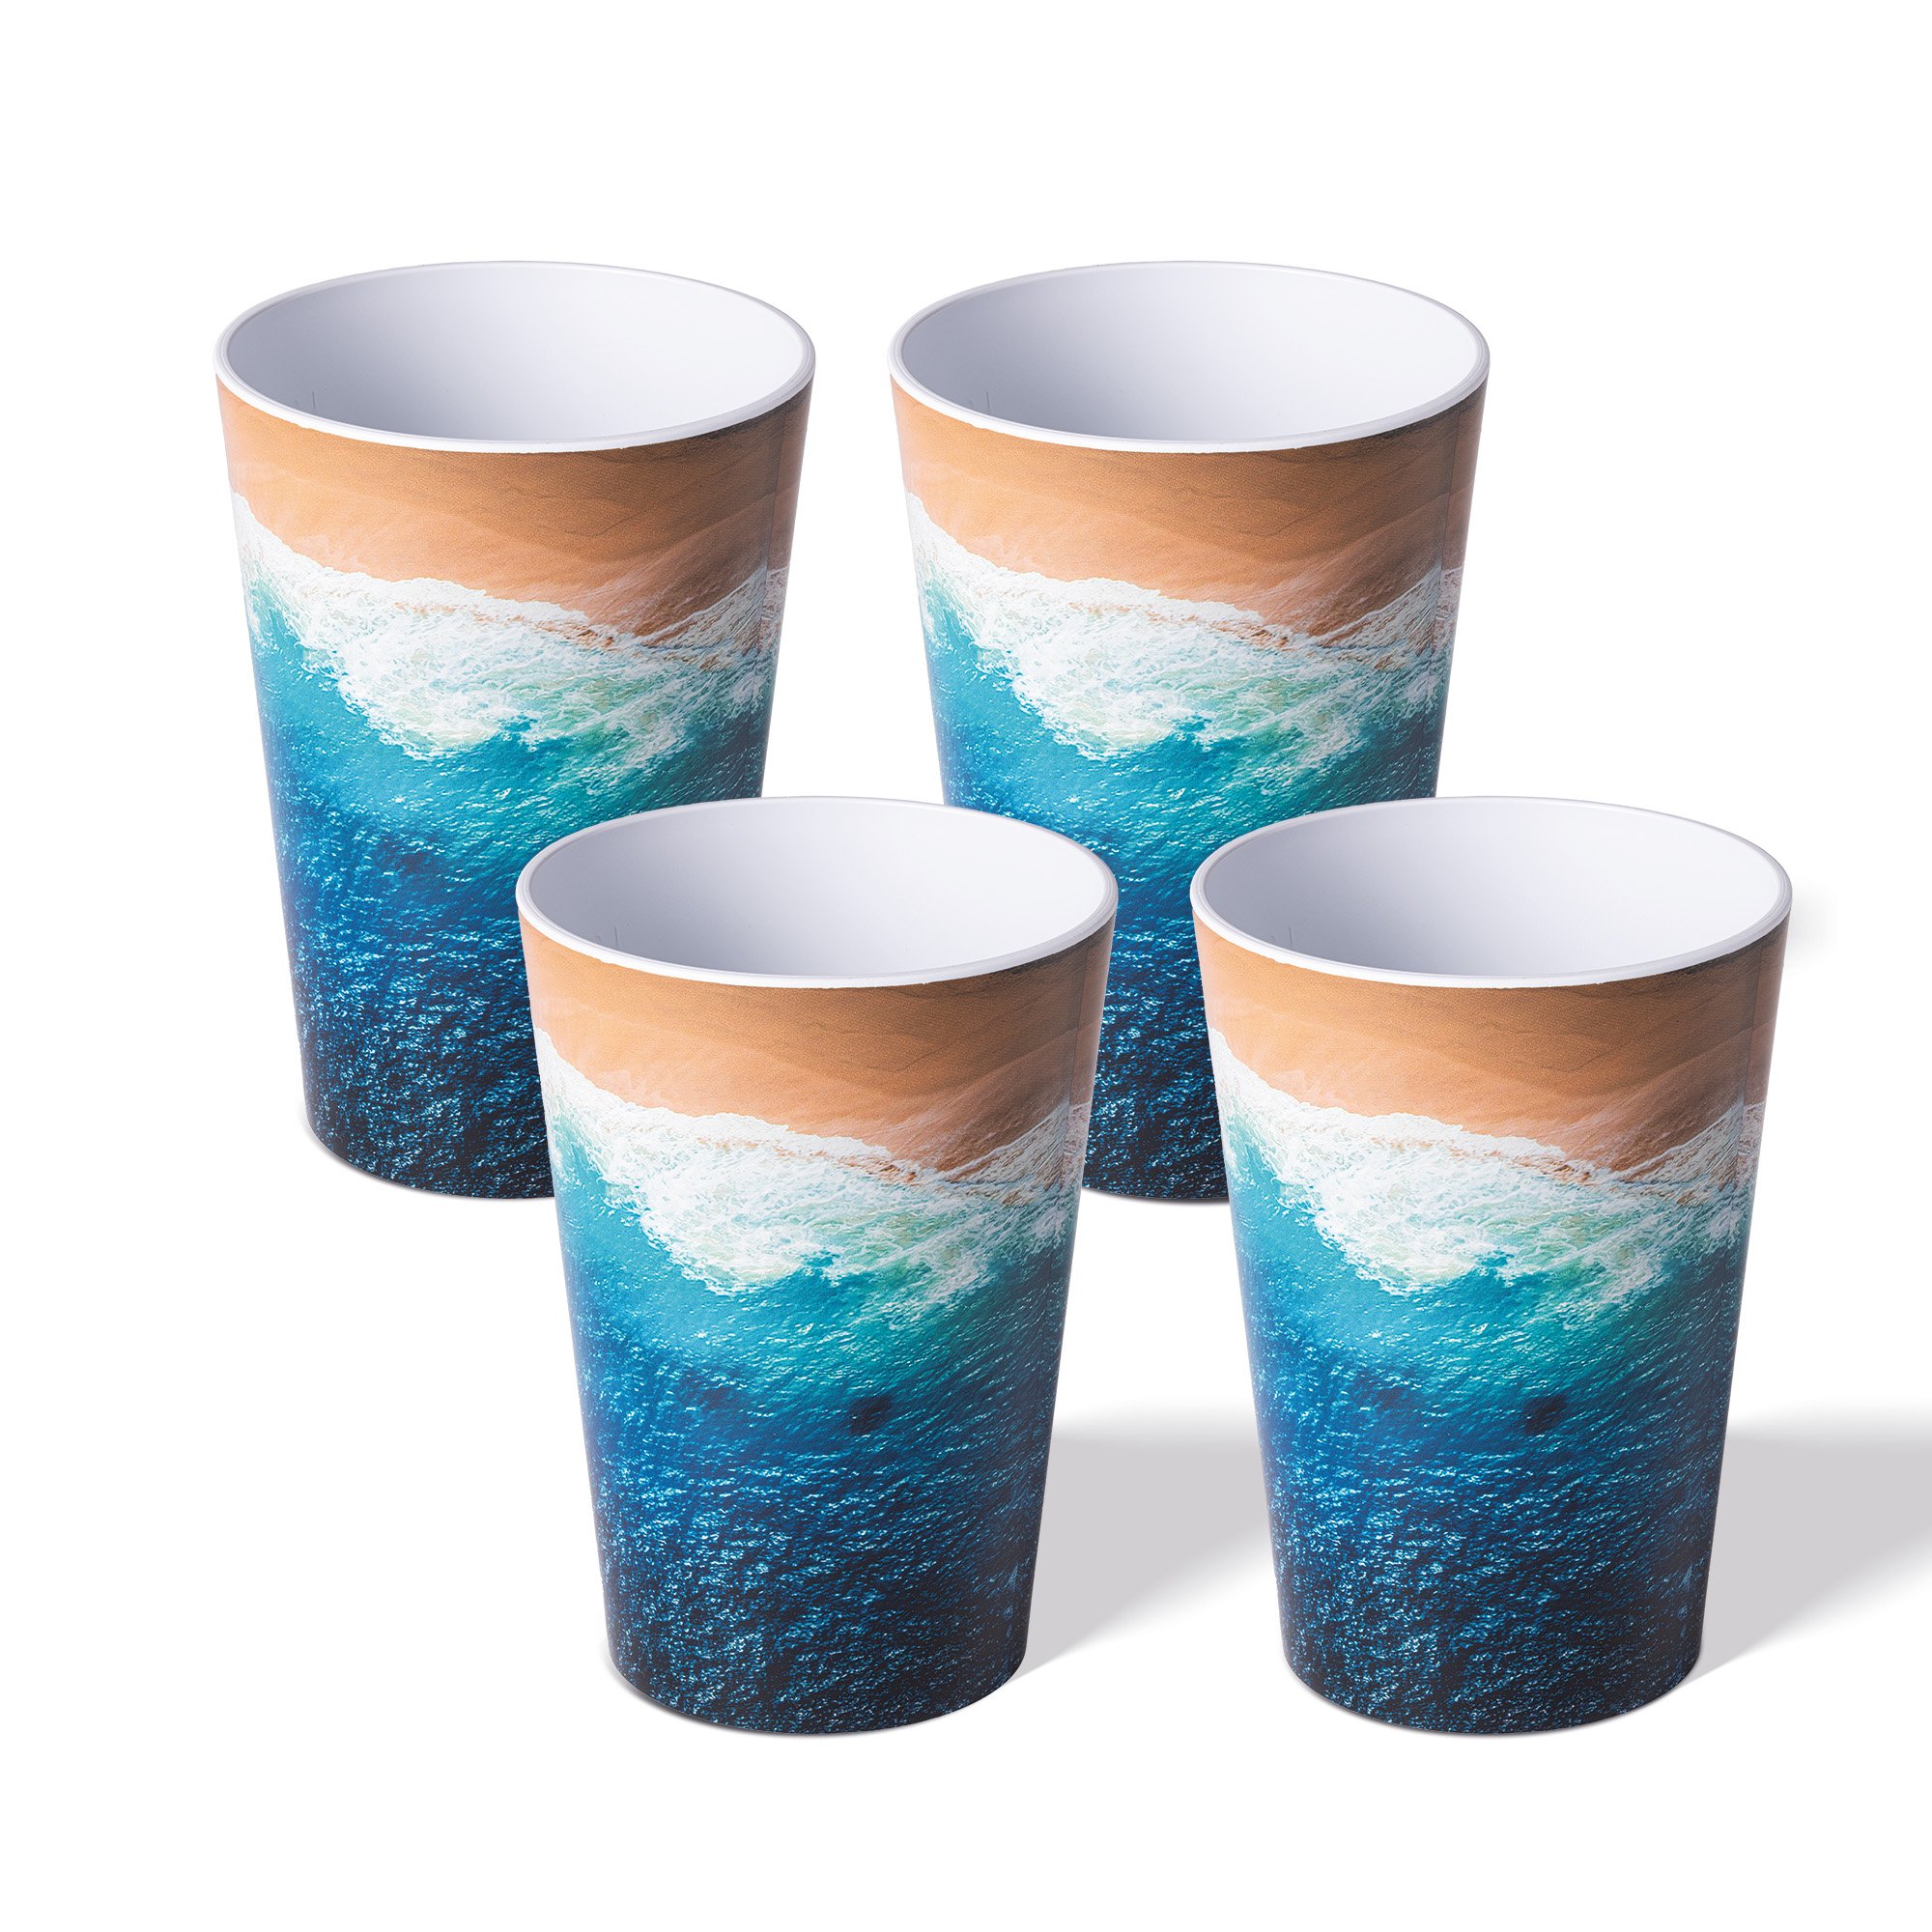 AWAVE® 4 pc Festival Cup Set, 300 ml, made of rPET, with Calibration Mark, Stackable